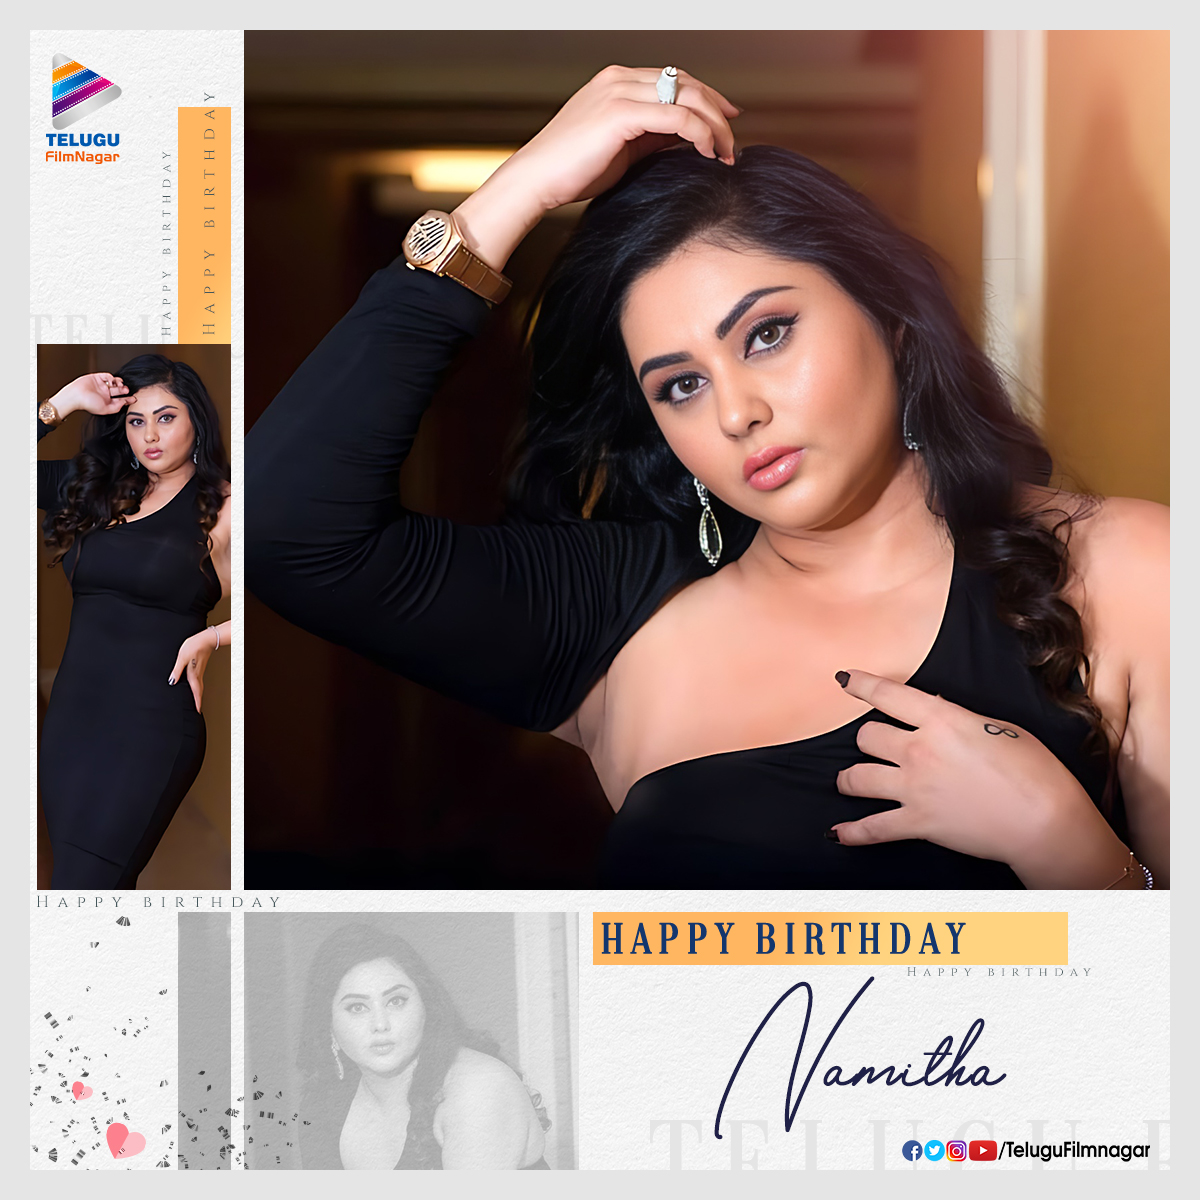 Here's wishing the beautiful actress #Namitha a very Happy Birthday & a very great year ahead!!🥳♥️

#HappyBirthdayNamitha
#HBDNamitha #TFNWishes #TeluguFilmNagar